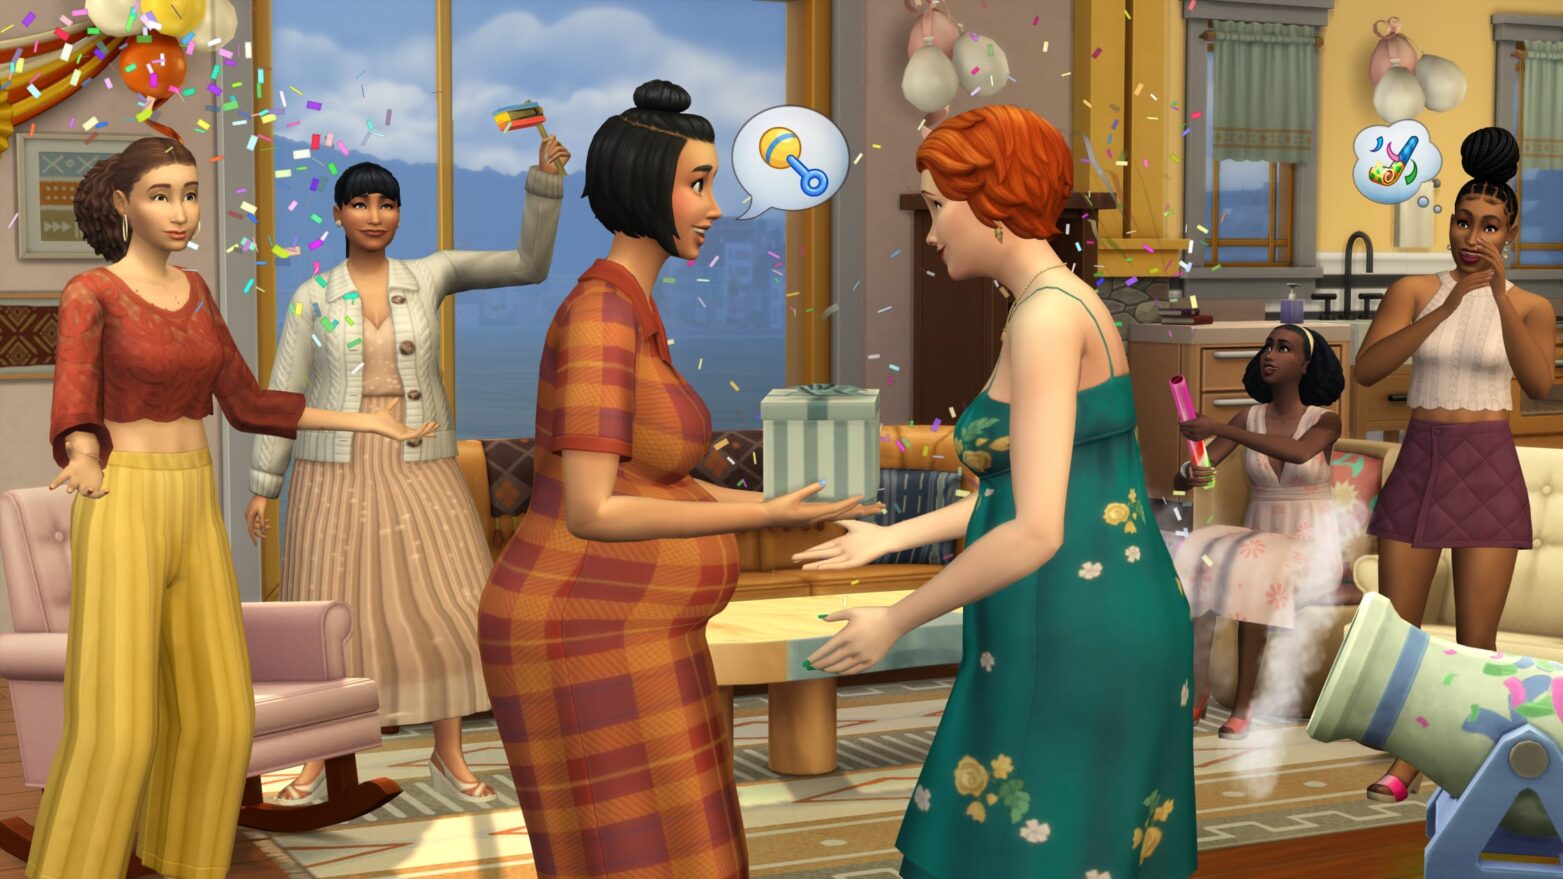 Sims 4 is a popular Web2 game.